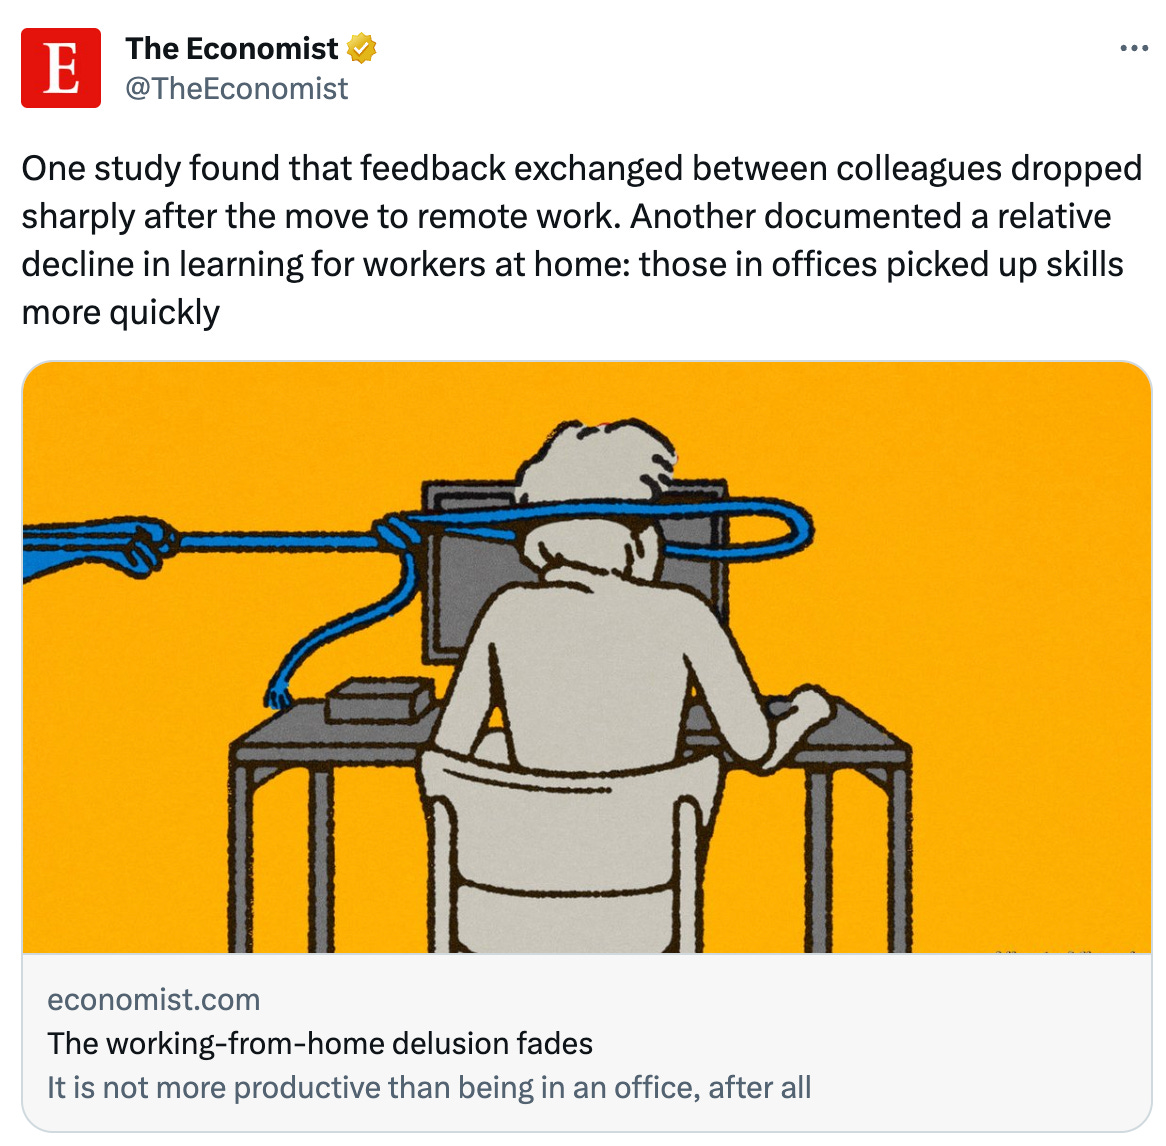  The Economist @TheEconomist One study found that feedback exchanged between colleagues dropped sharply after the move to remote work. Another documented a relative decline in learning for workers at home: those in offices picked up skills more quickly economist.com The working-from-home delusion fades It is not more productive than being in an office, after all